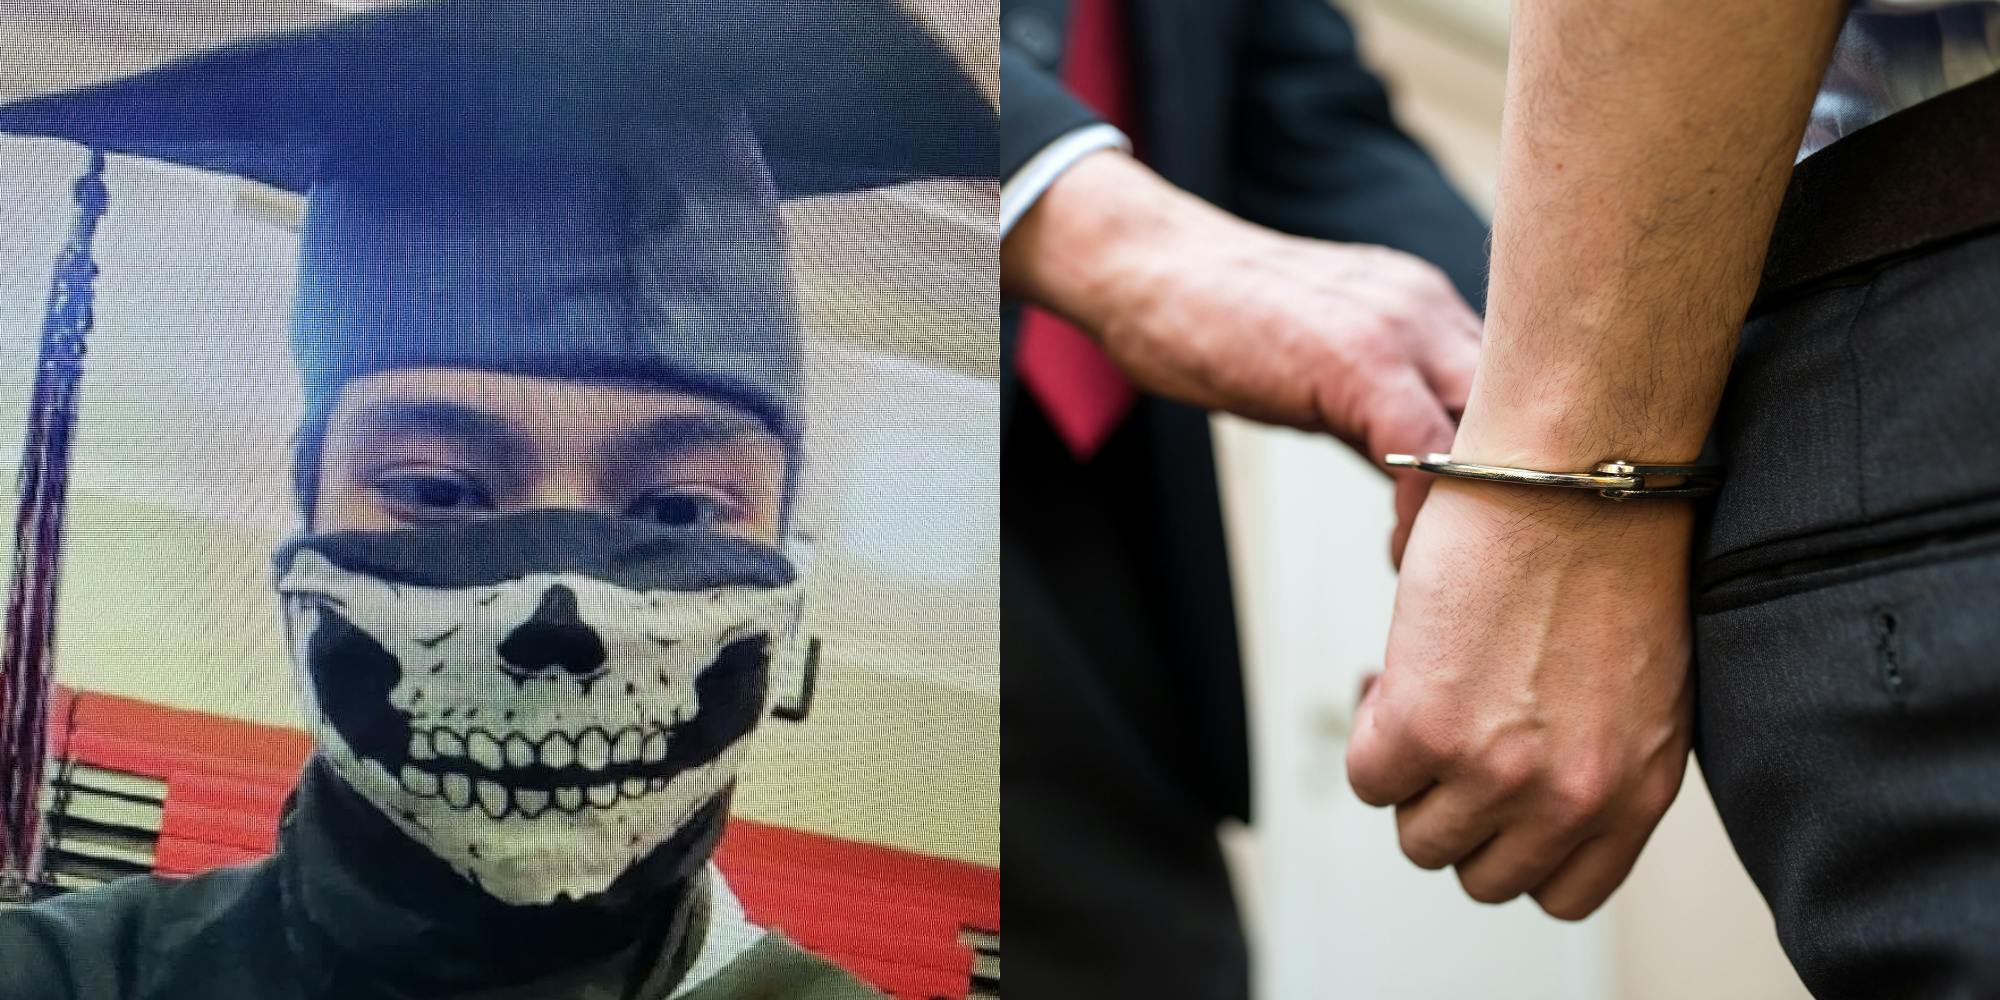 Nick Fuentes Key Lieutenant in graduation cap and mask (l) Man being handcuffed by man in suit (r)